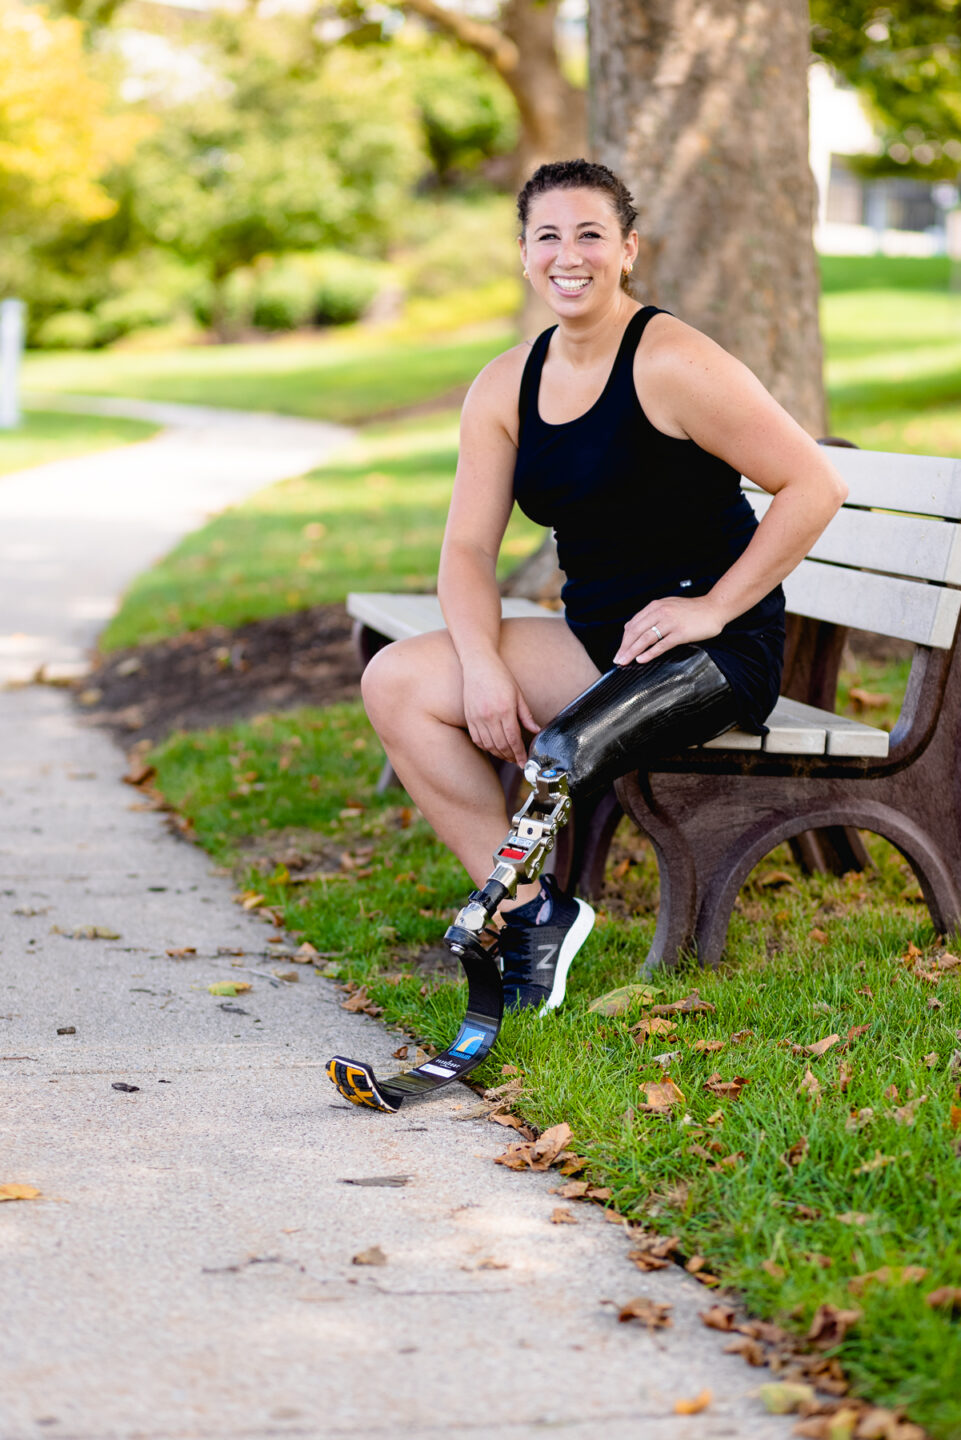 Woman in running attire sits on park bench and smiles at camera.